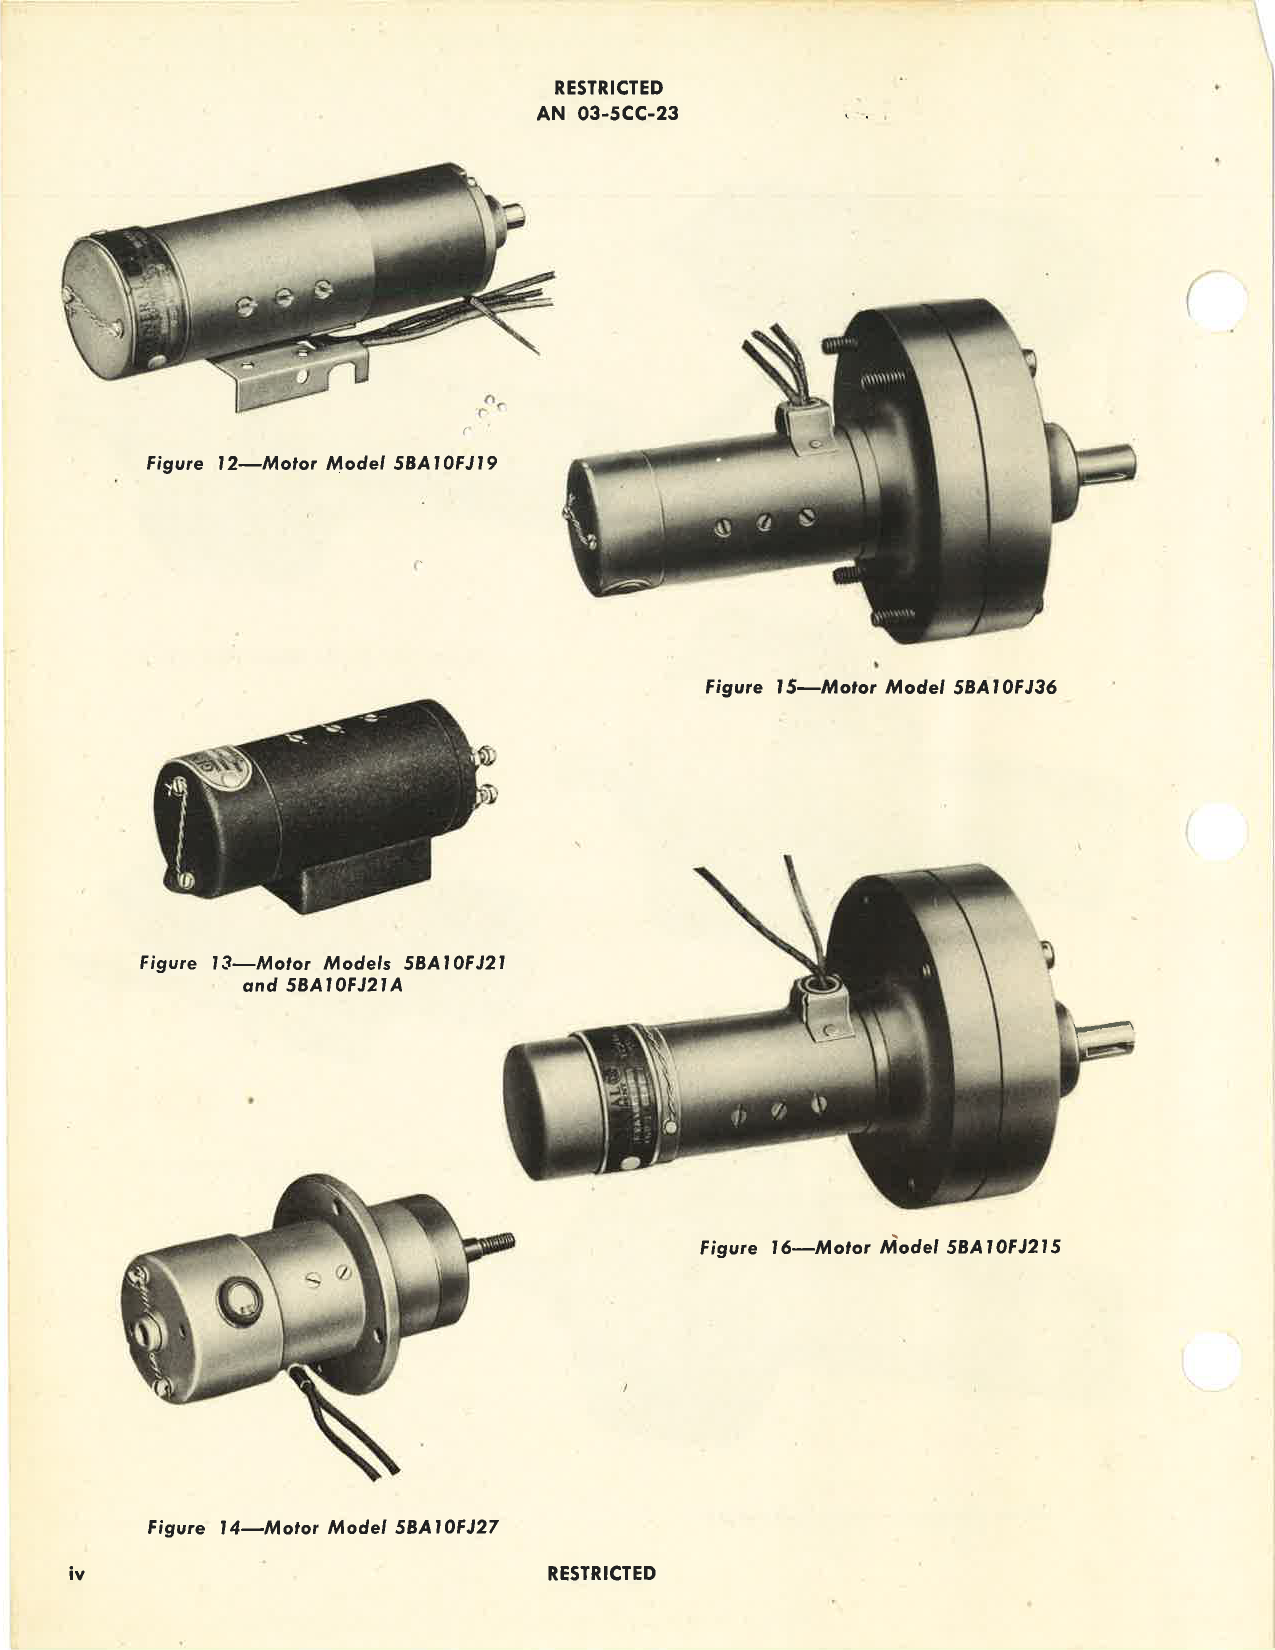 Sample page 6 from AirCorps Library document: Handbook of Instructions with Parts Catalog for Aircraft Electric Motors Model 5BA10 Series